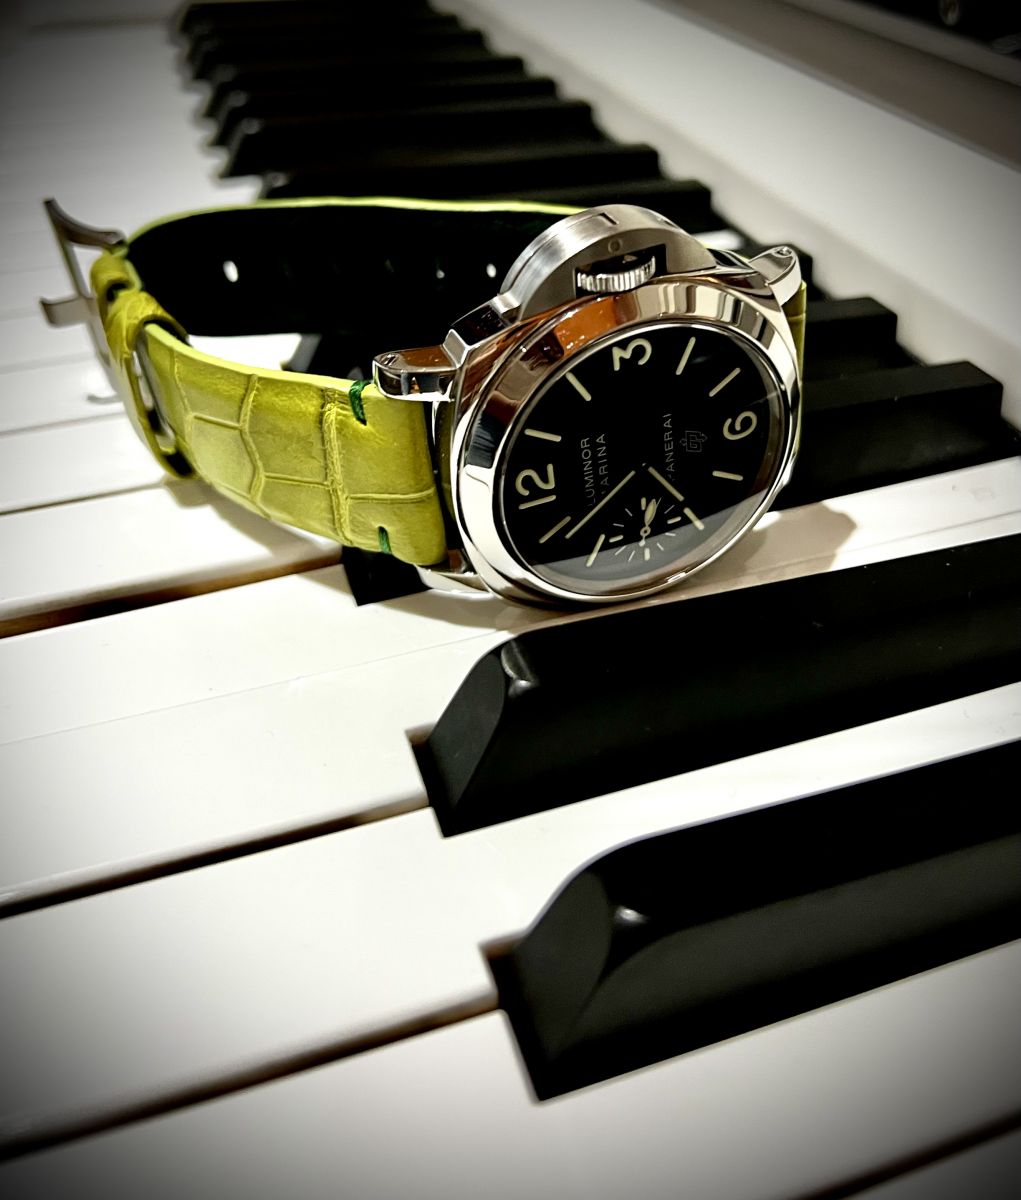 Green Lime Alligator leather strap PANERAI style